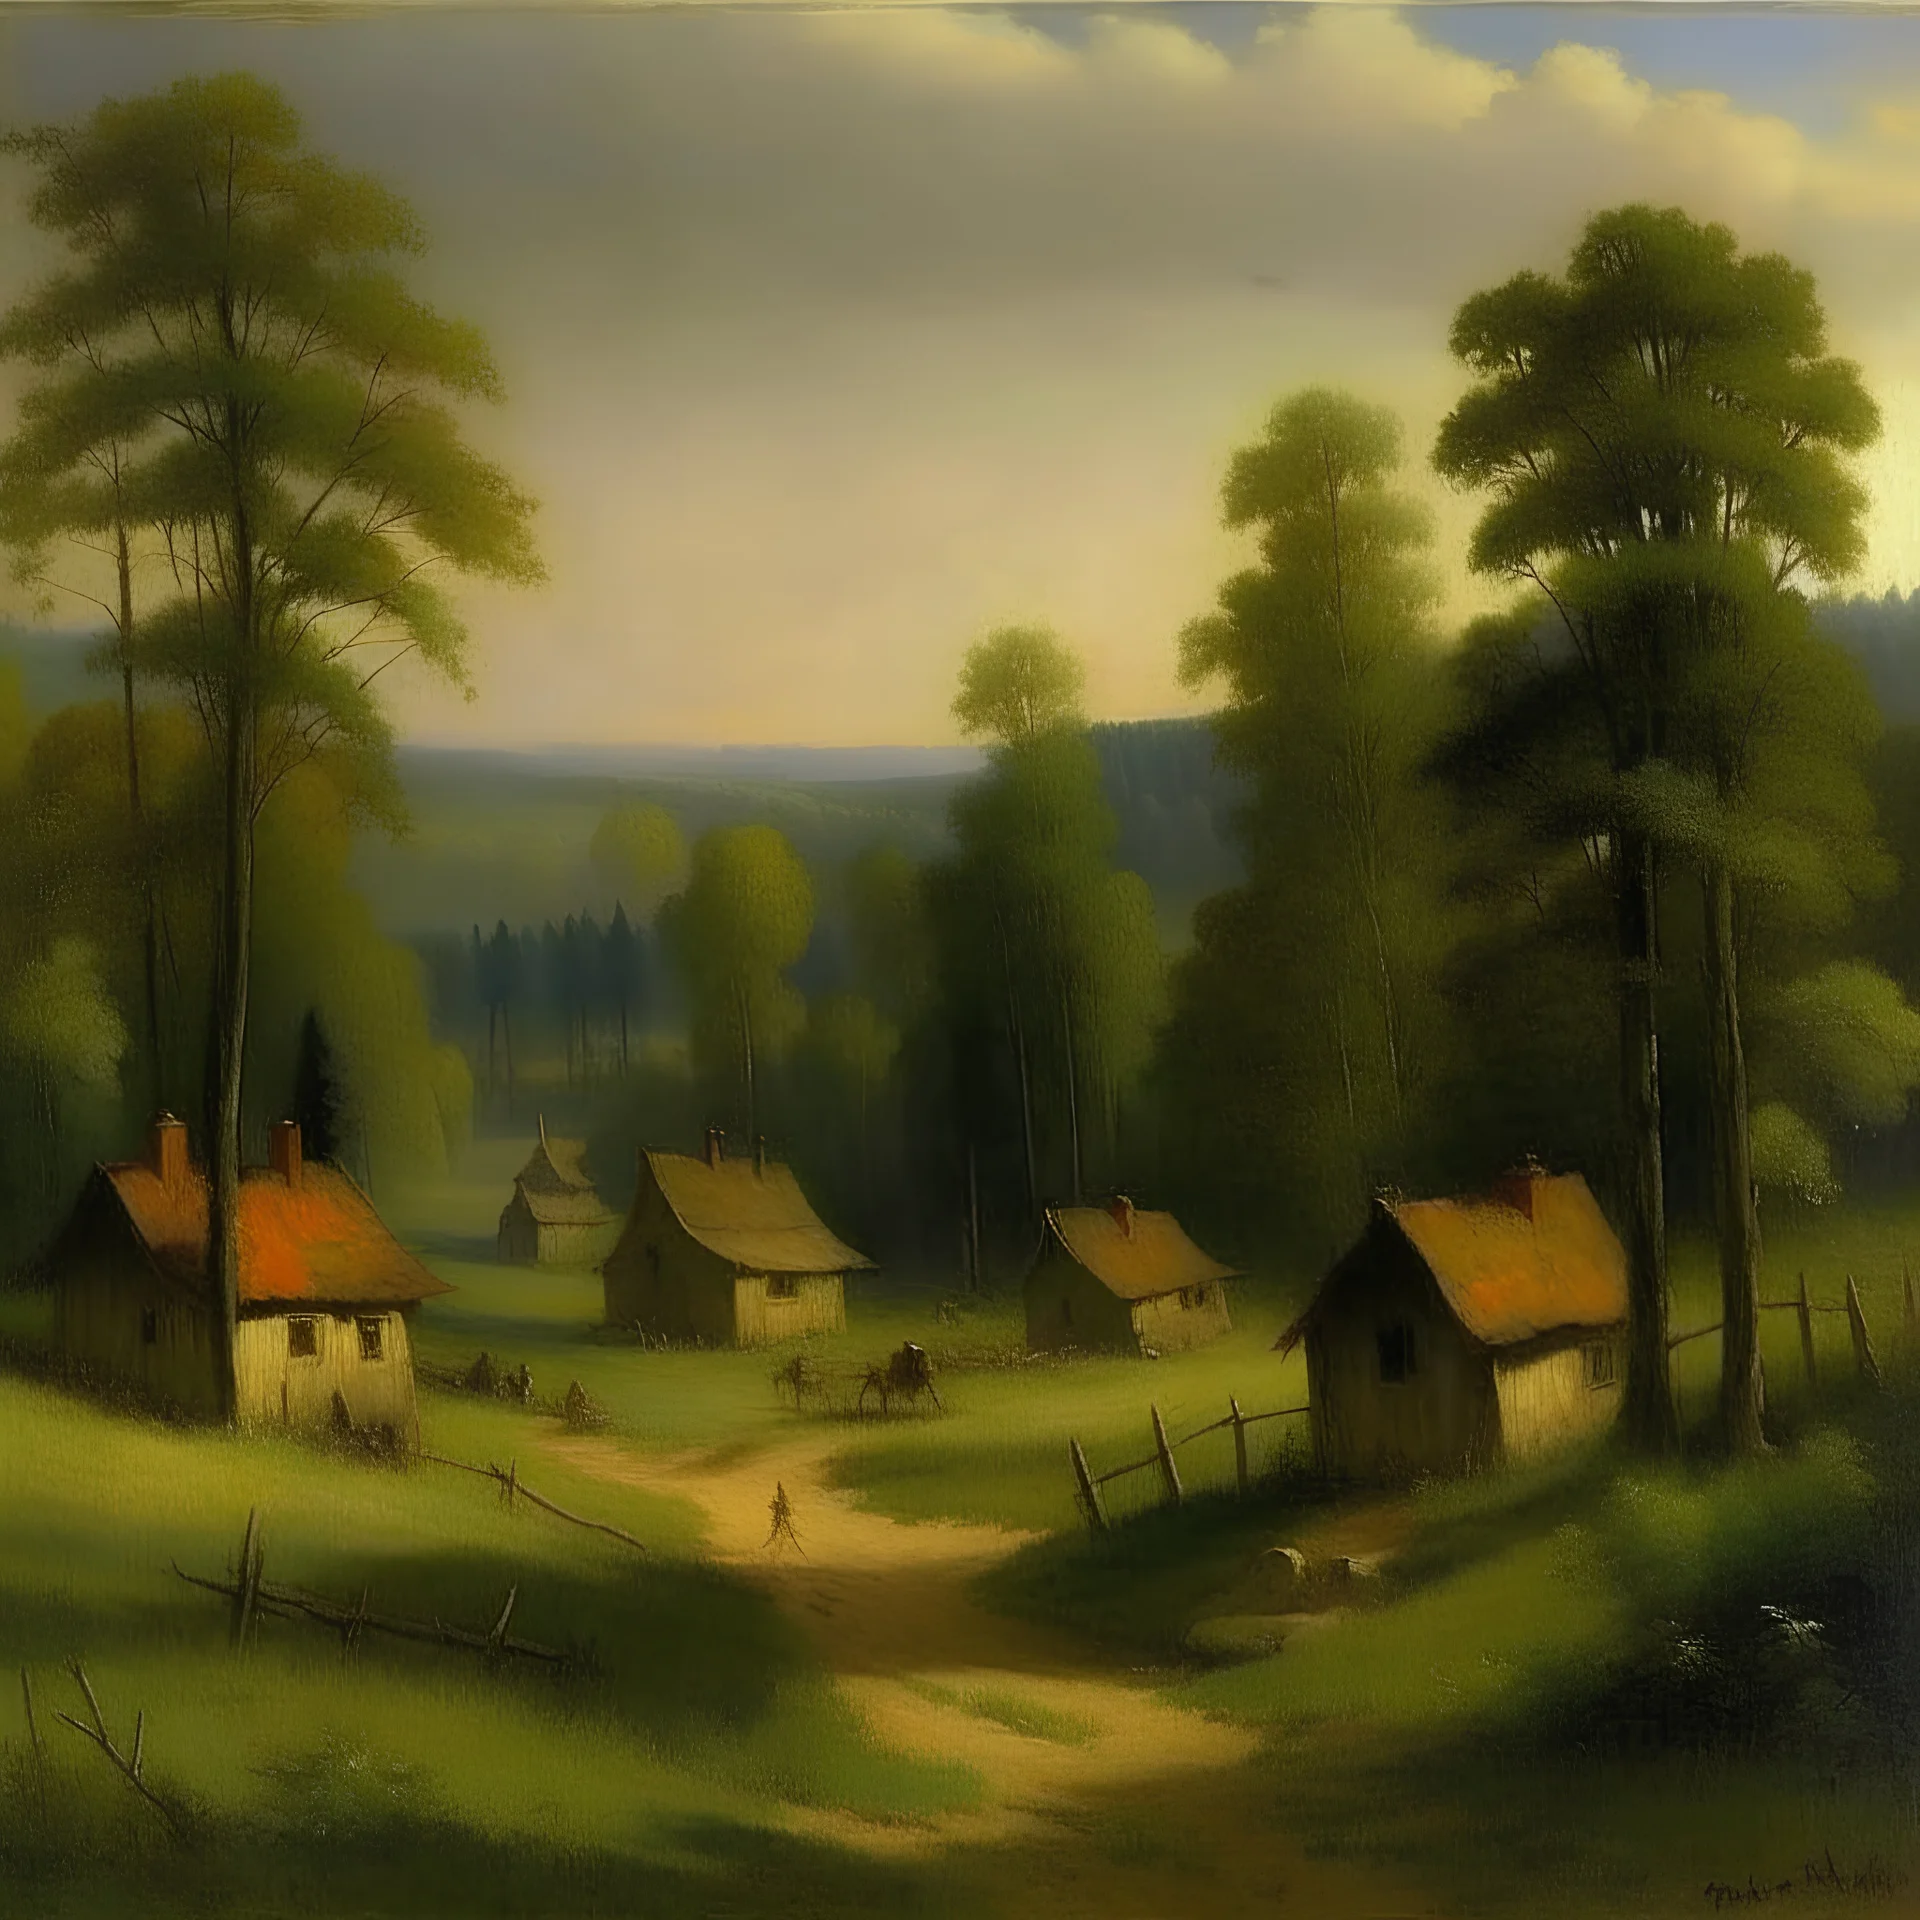 A village made out of wood near a forest painted by George Inness